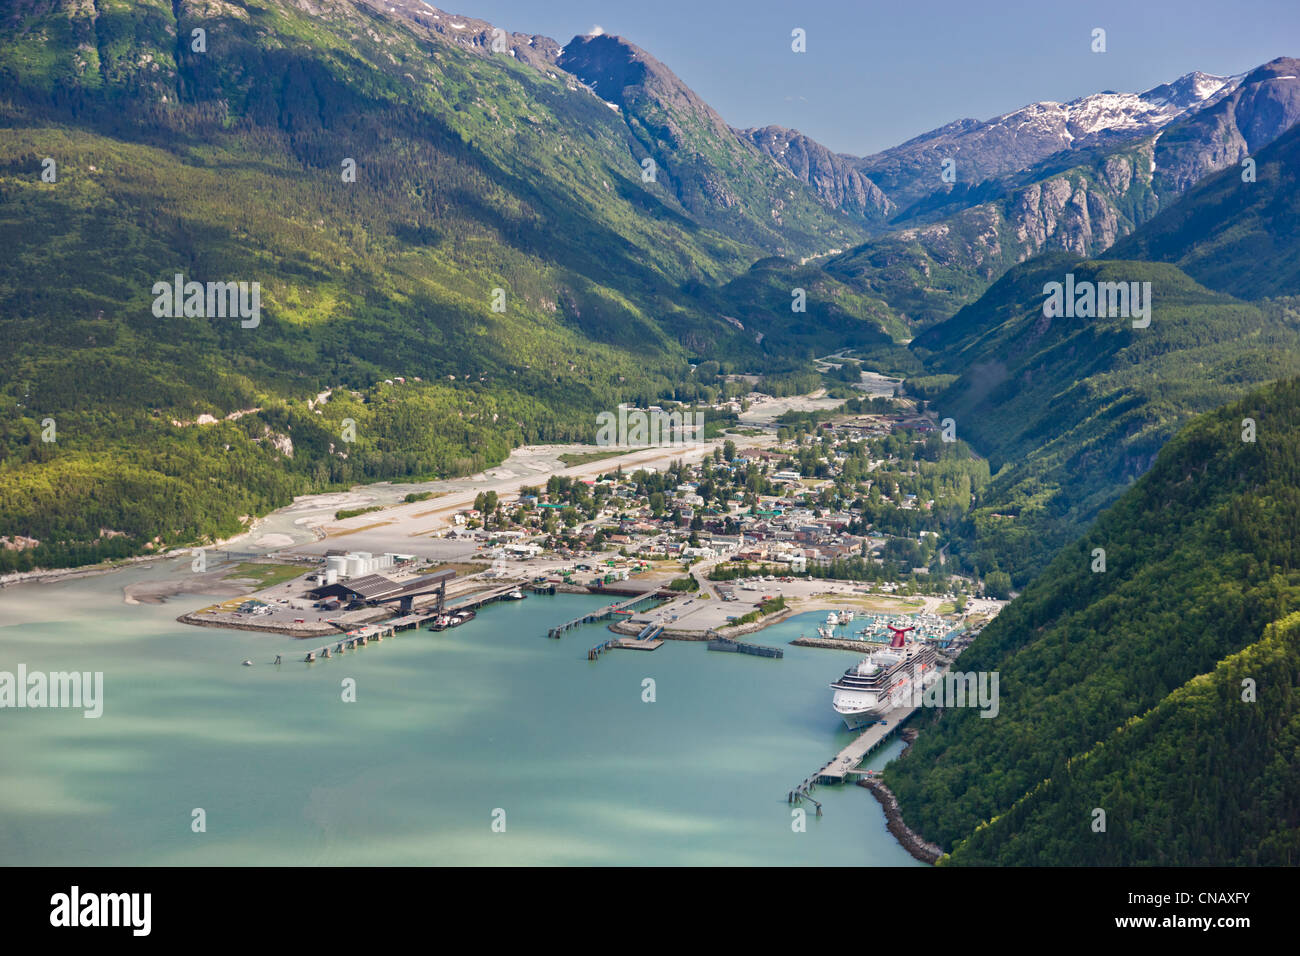 Aerial view of the city of Skagway with a cruise ship docked at port, Southeast Alaska, Summer Stock Photo